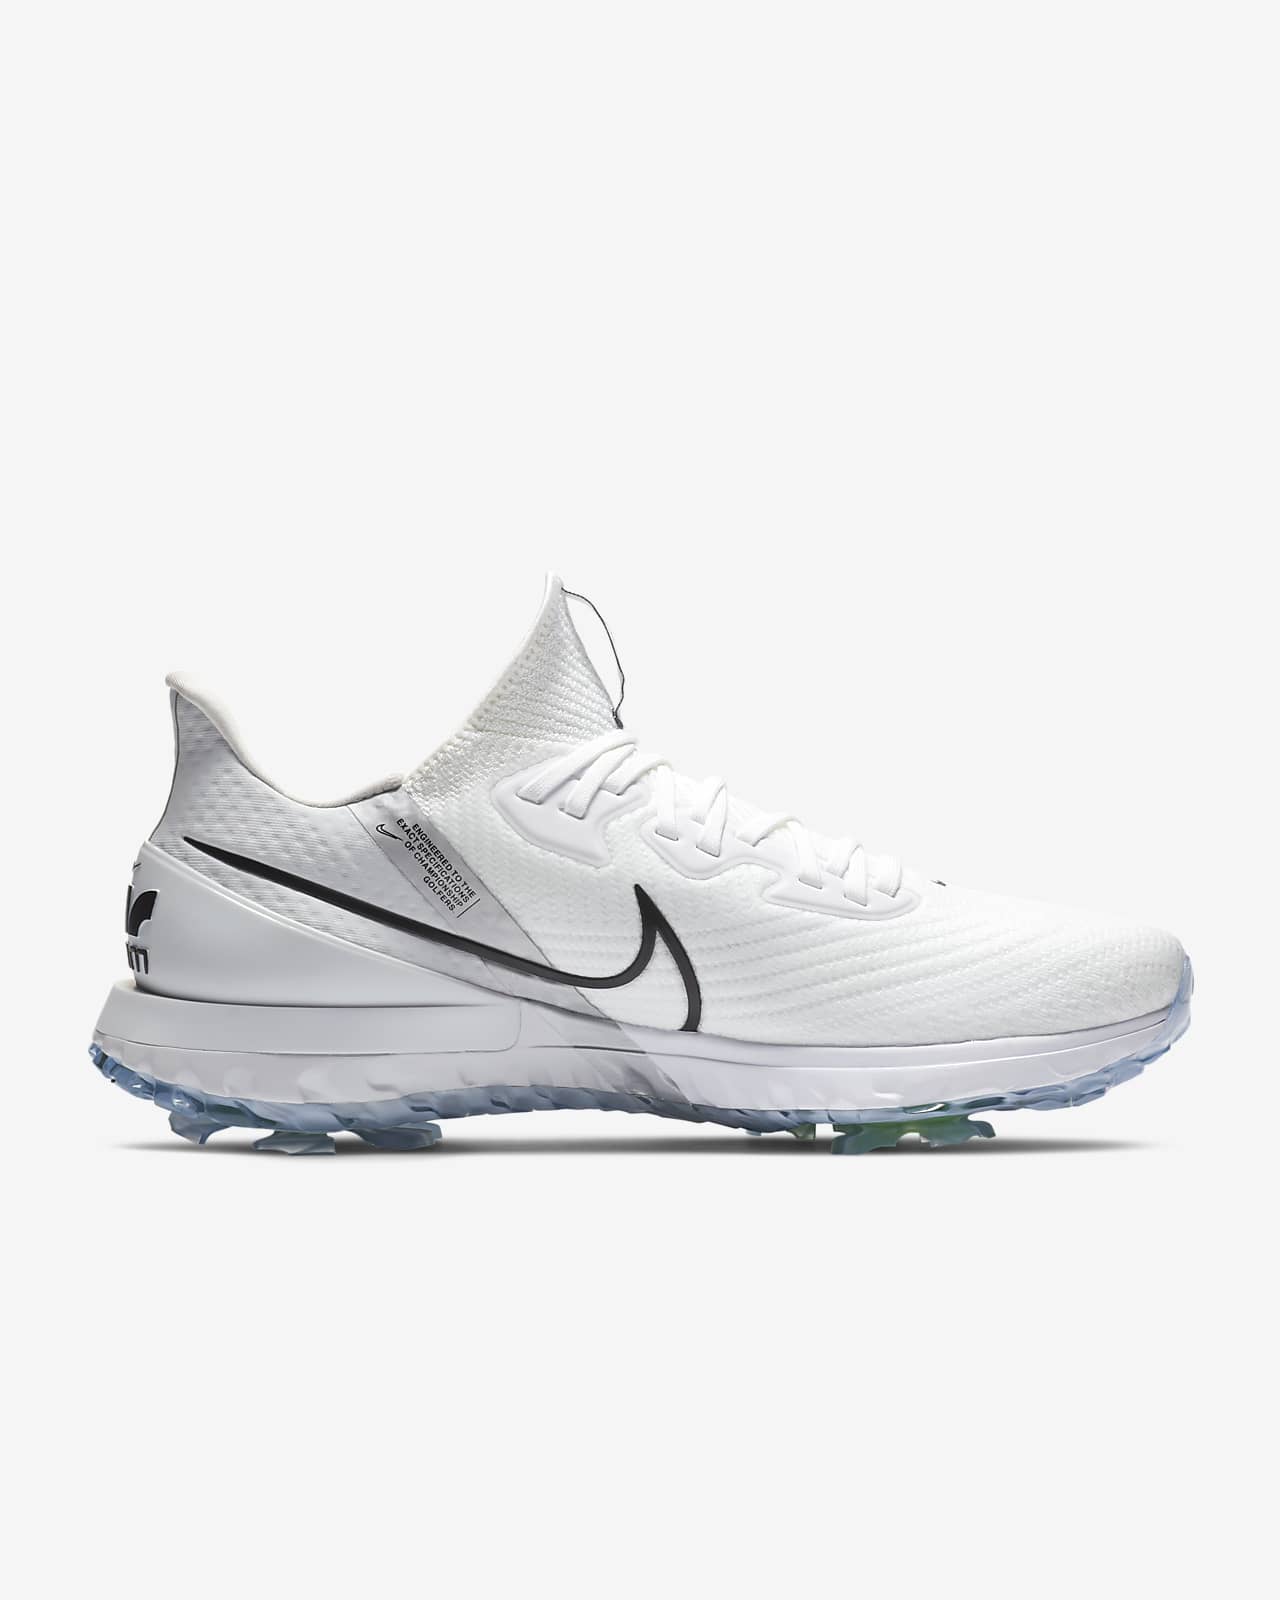 new nike golf shoes 2020 infinity tour